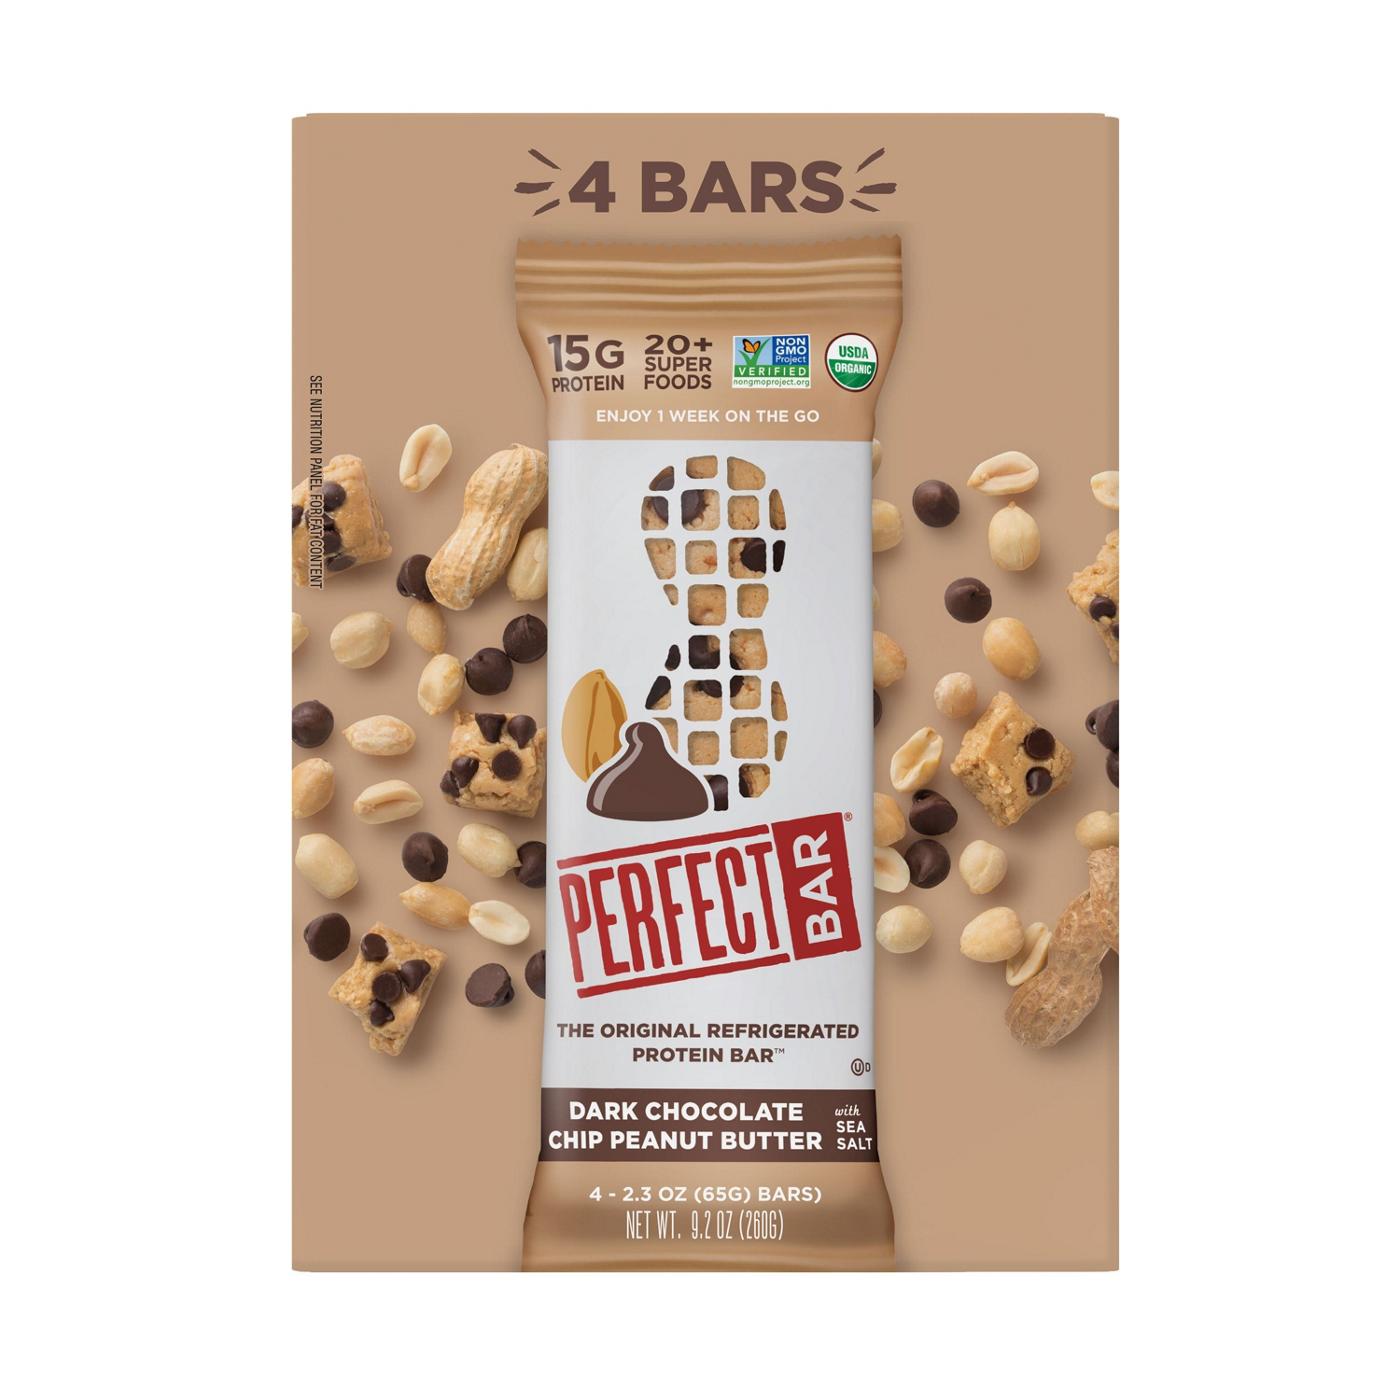 Perfect Bar 15g Protein Bars - Dark Chocolate Chip Peanut Butter; image 1 of 7